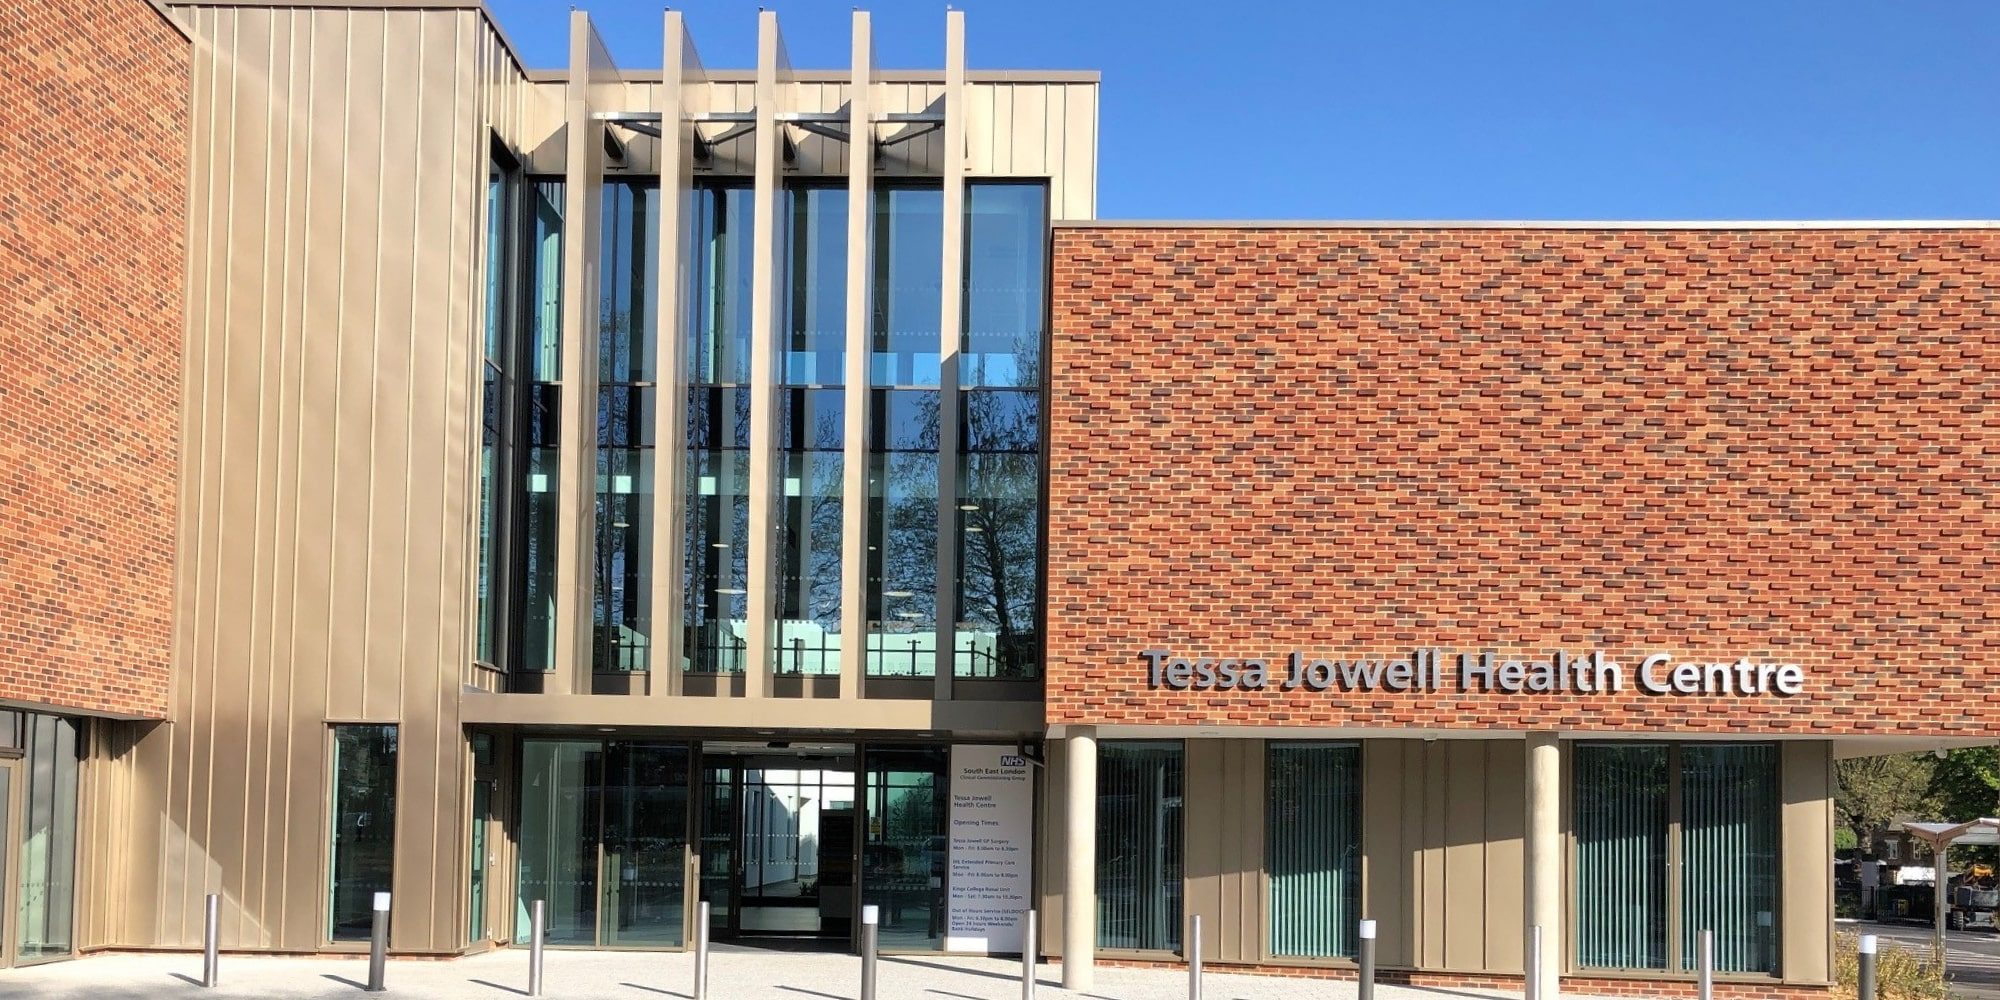 MJ Medical supports completion of Tessa Jowell Health Centre